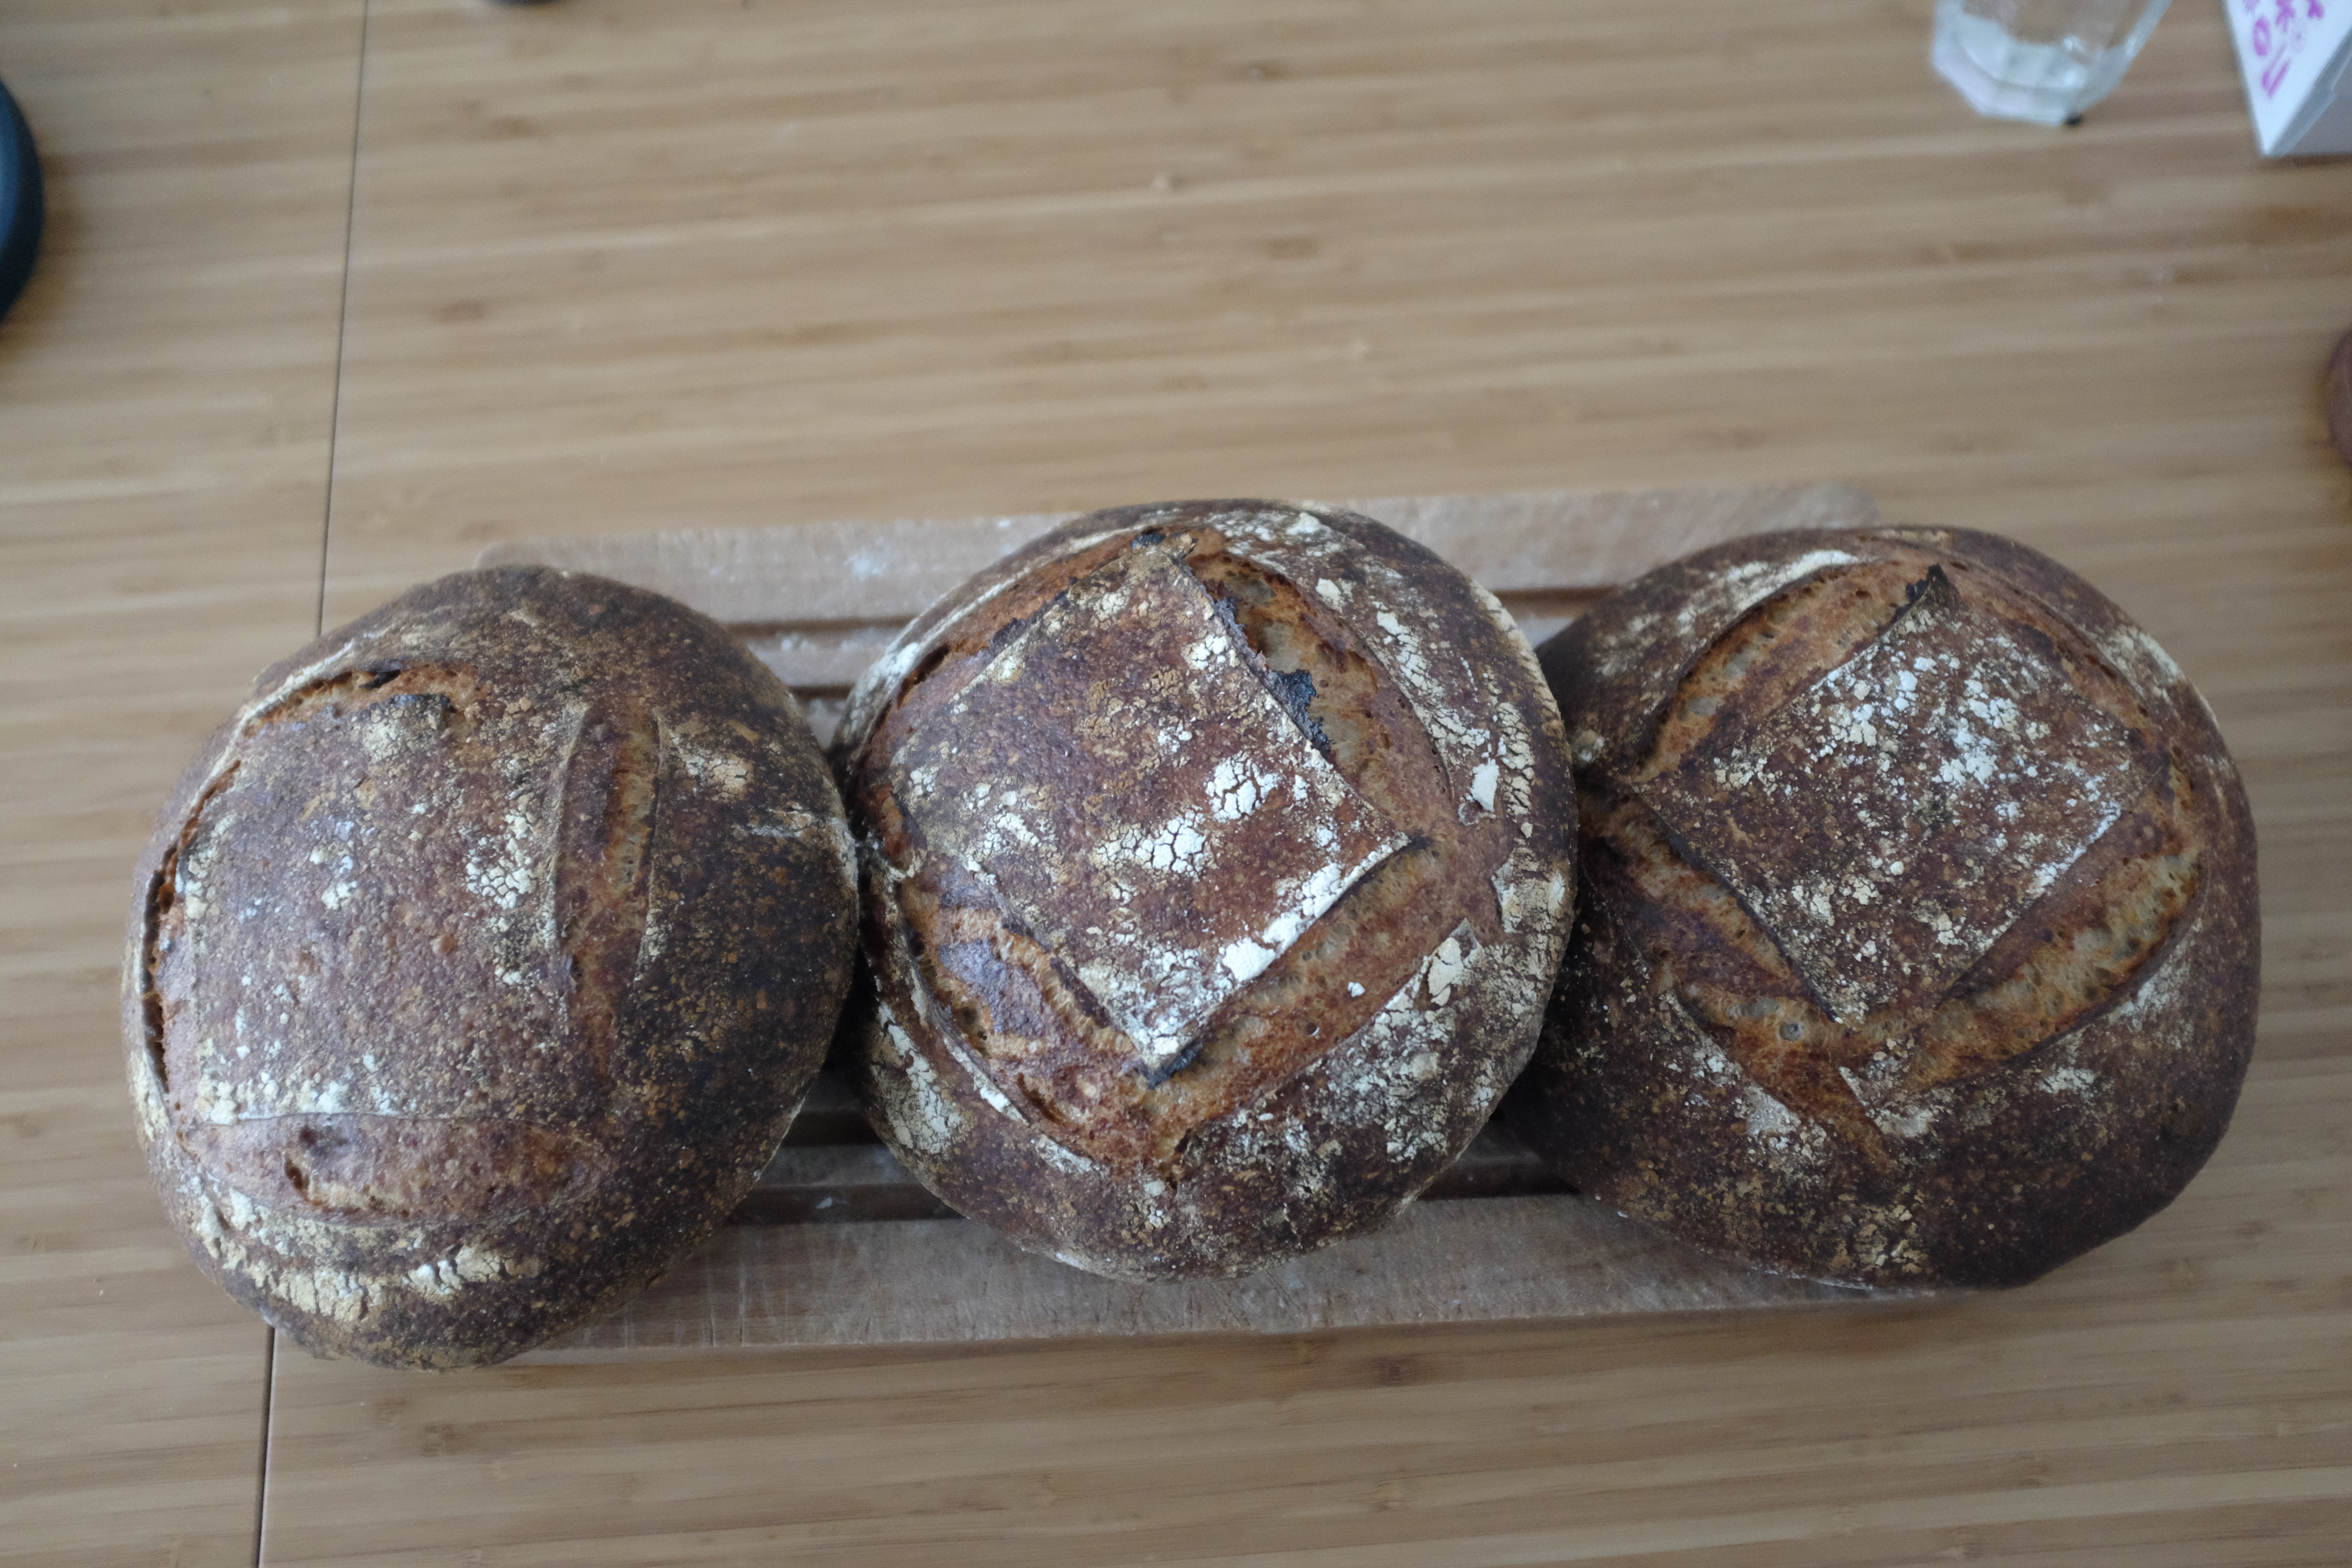 An image of a bread called “Wholemeal Sourdough Plus”